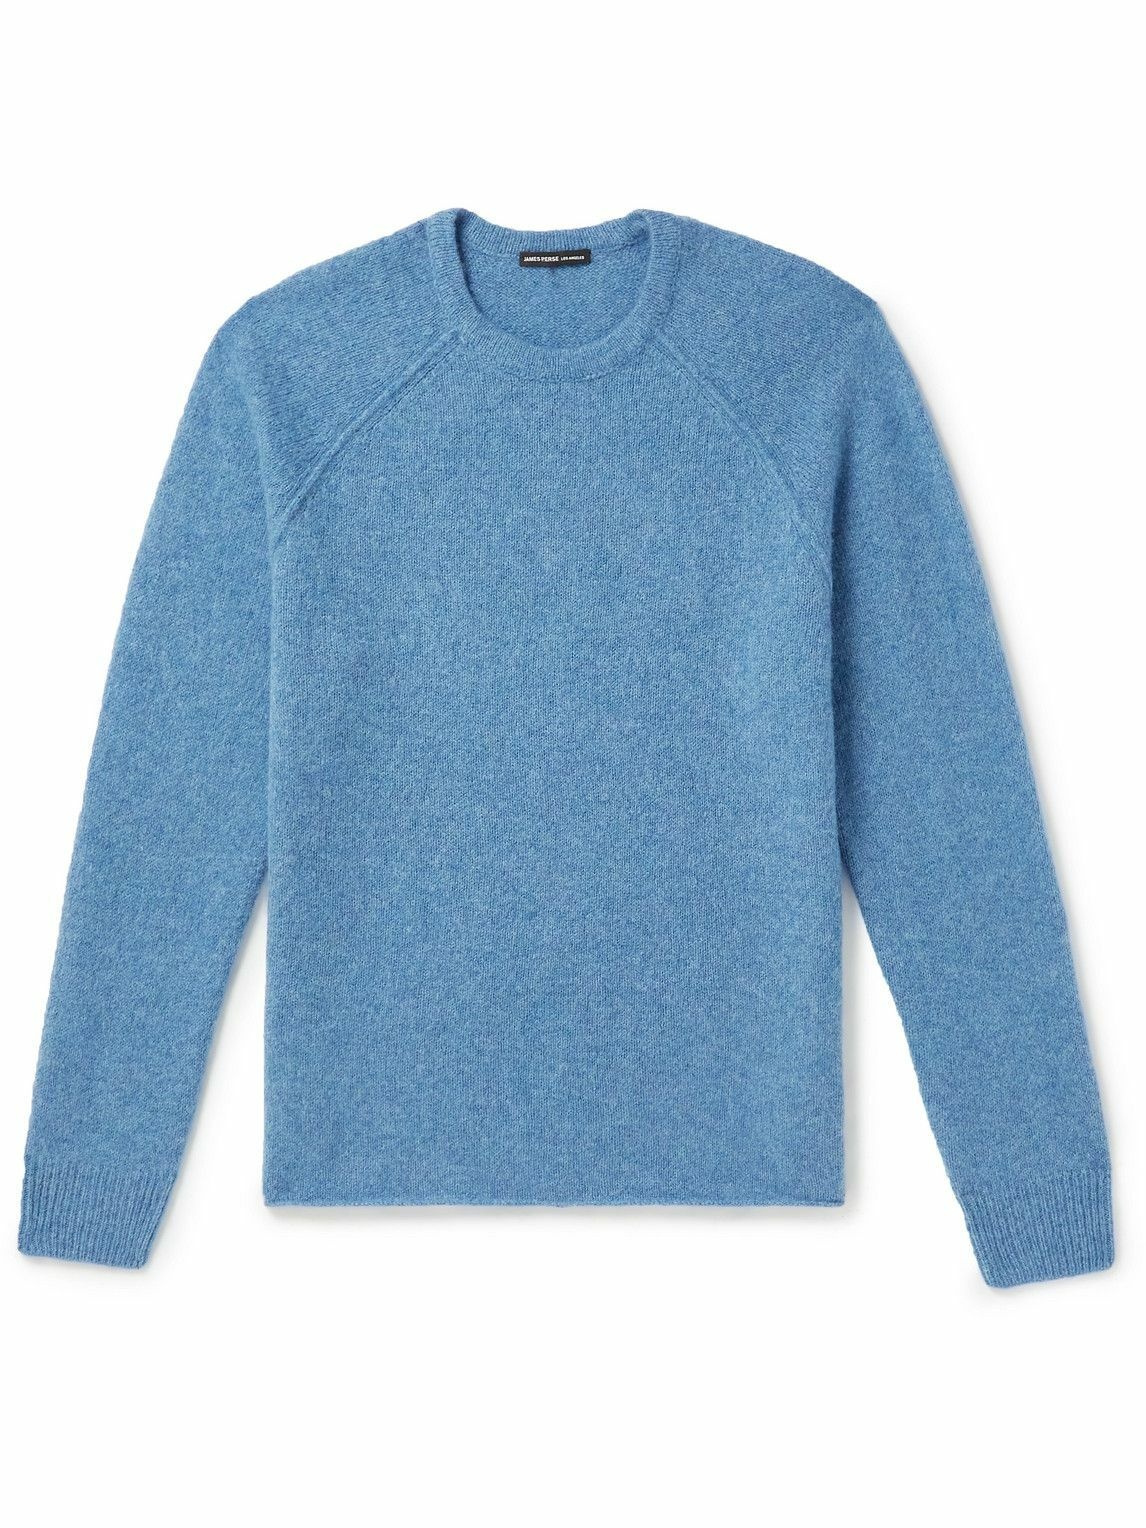 James Perse - Cashmere Sweater - Blue James Perse